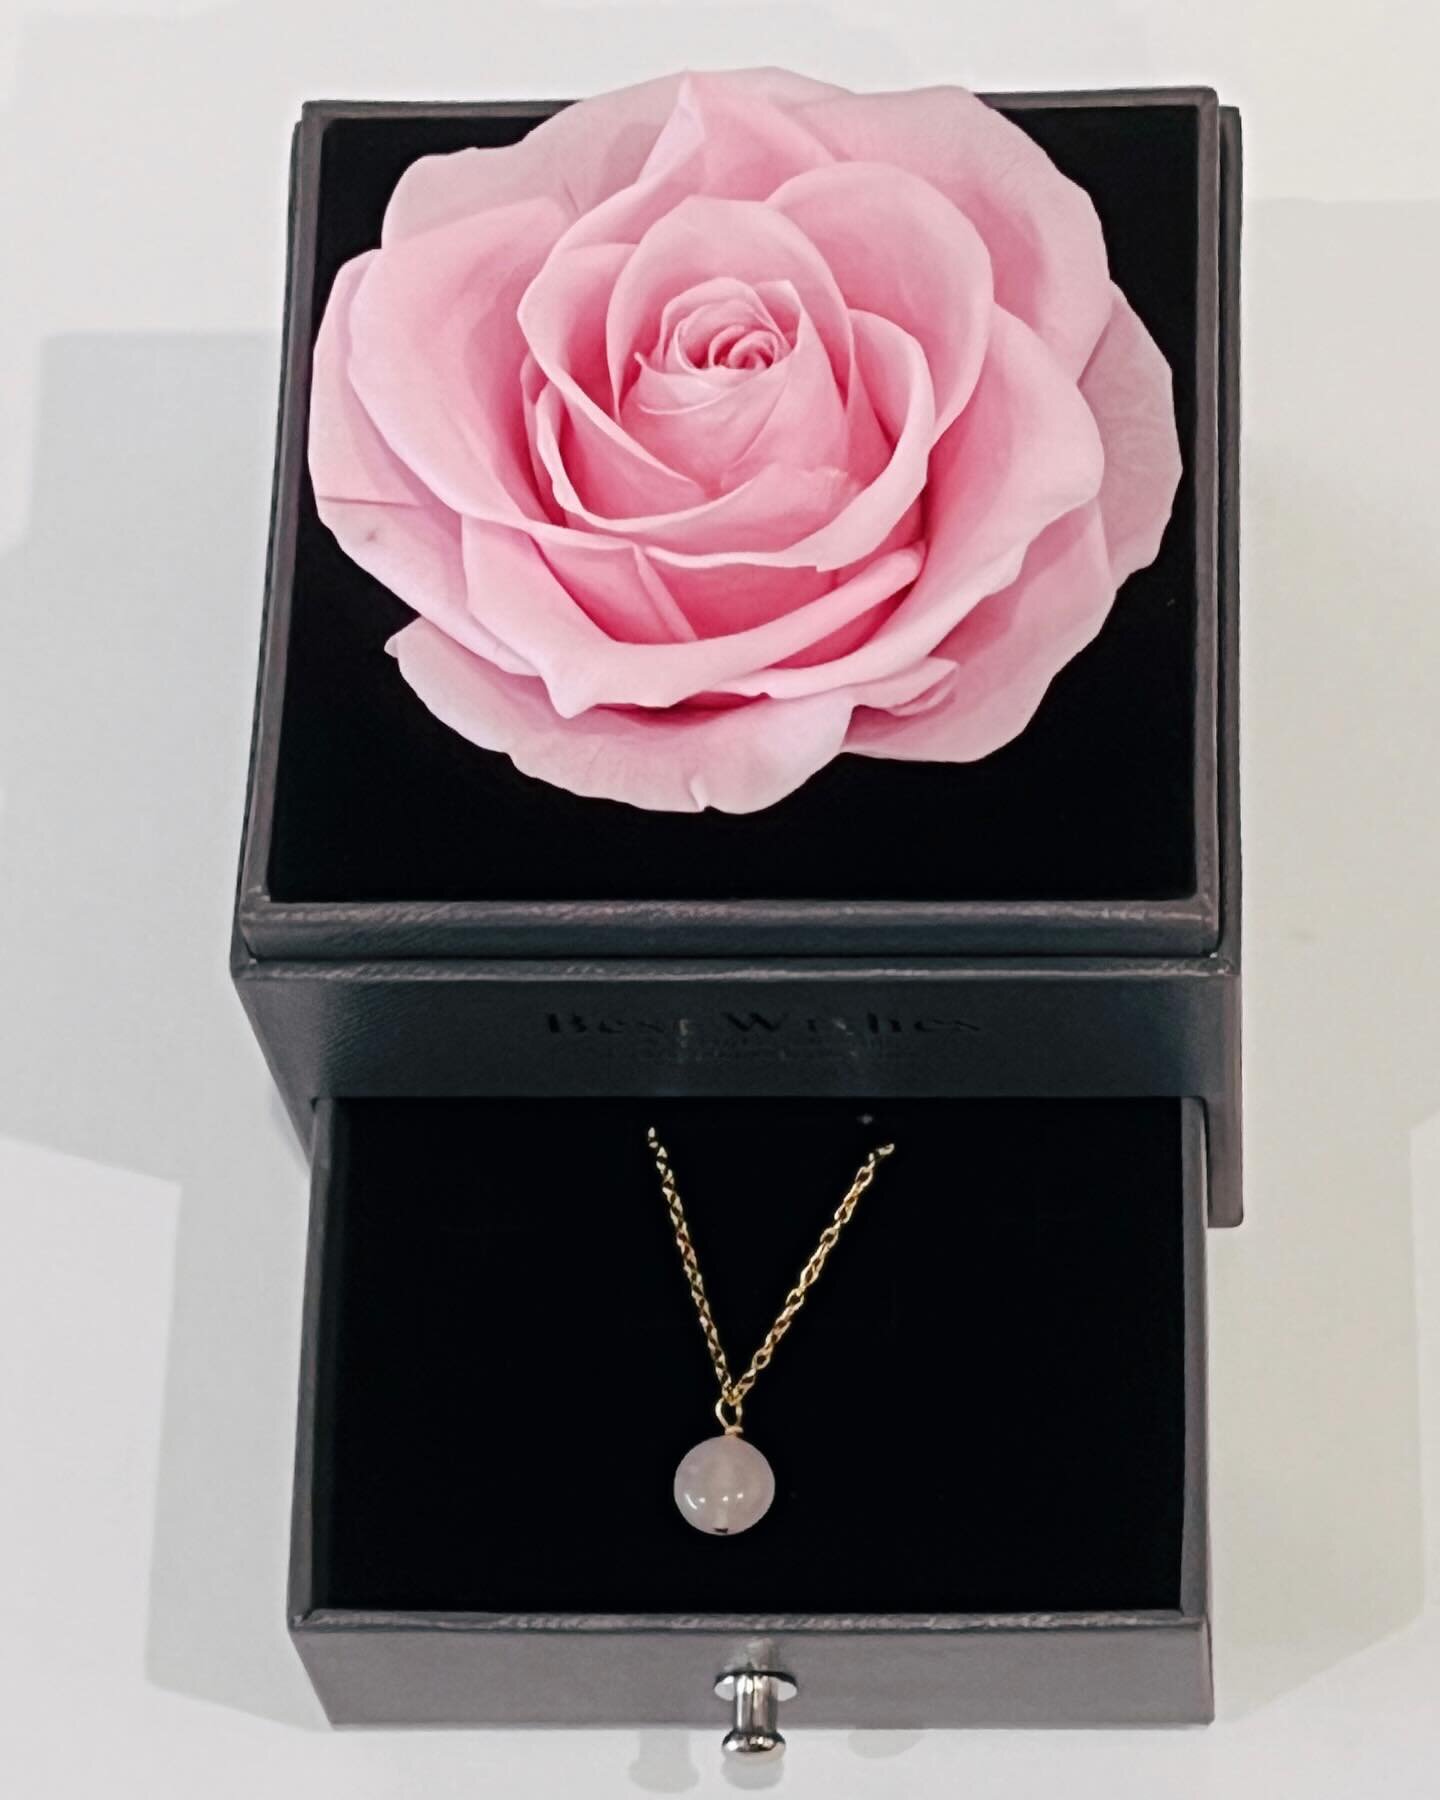 Ignite passion this Valentine&rsquo;s Day with our Preserved Rose Jewellery Box.
A timeless gift for your special one. 🌹💖
Unveil the symbol of eternal love, available now on our website.
Make every moment memorable. 💍
.
.
📍103 Centre Dandenong Rd